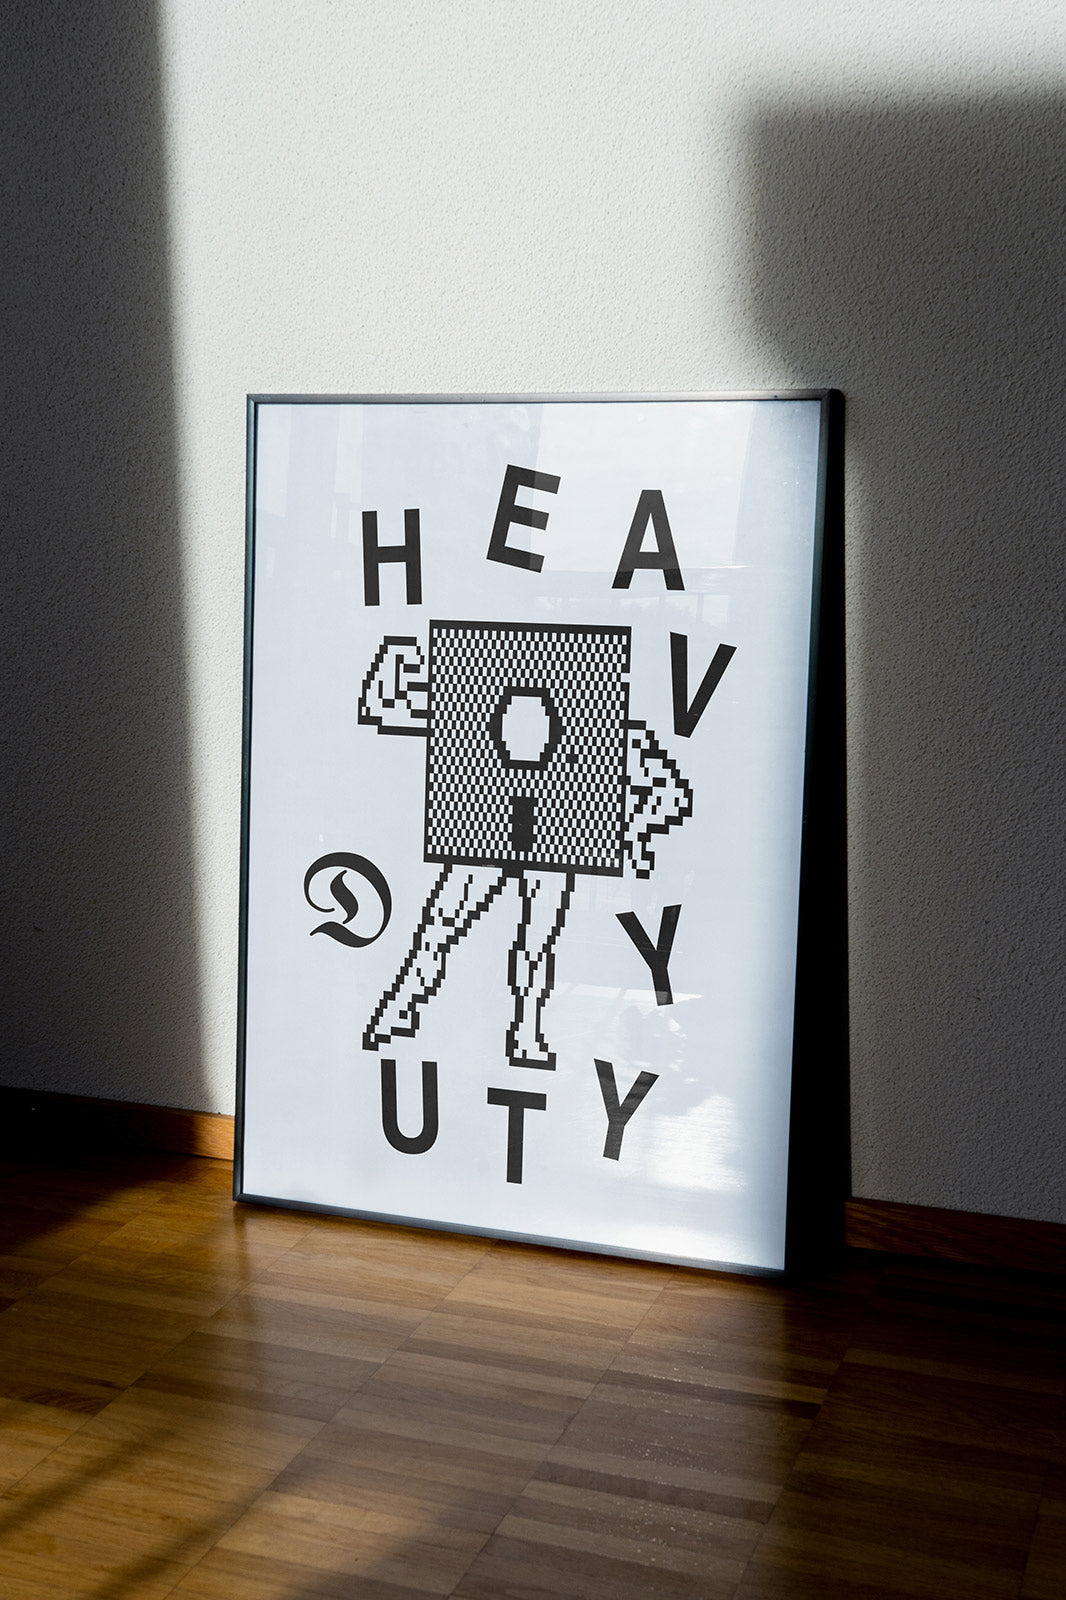 Framed Duties Tuff print poster featuring a pixel illustration of a floppy disc with arms and legs, as well as text saying 'HEAVY DUTY', standing on a white floor and leaning against a white wall.